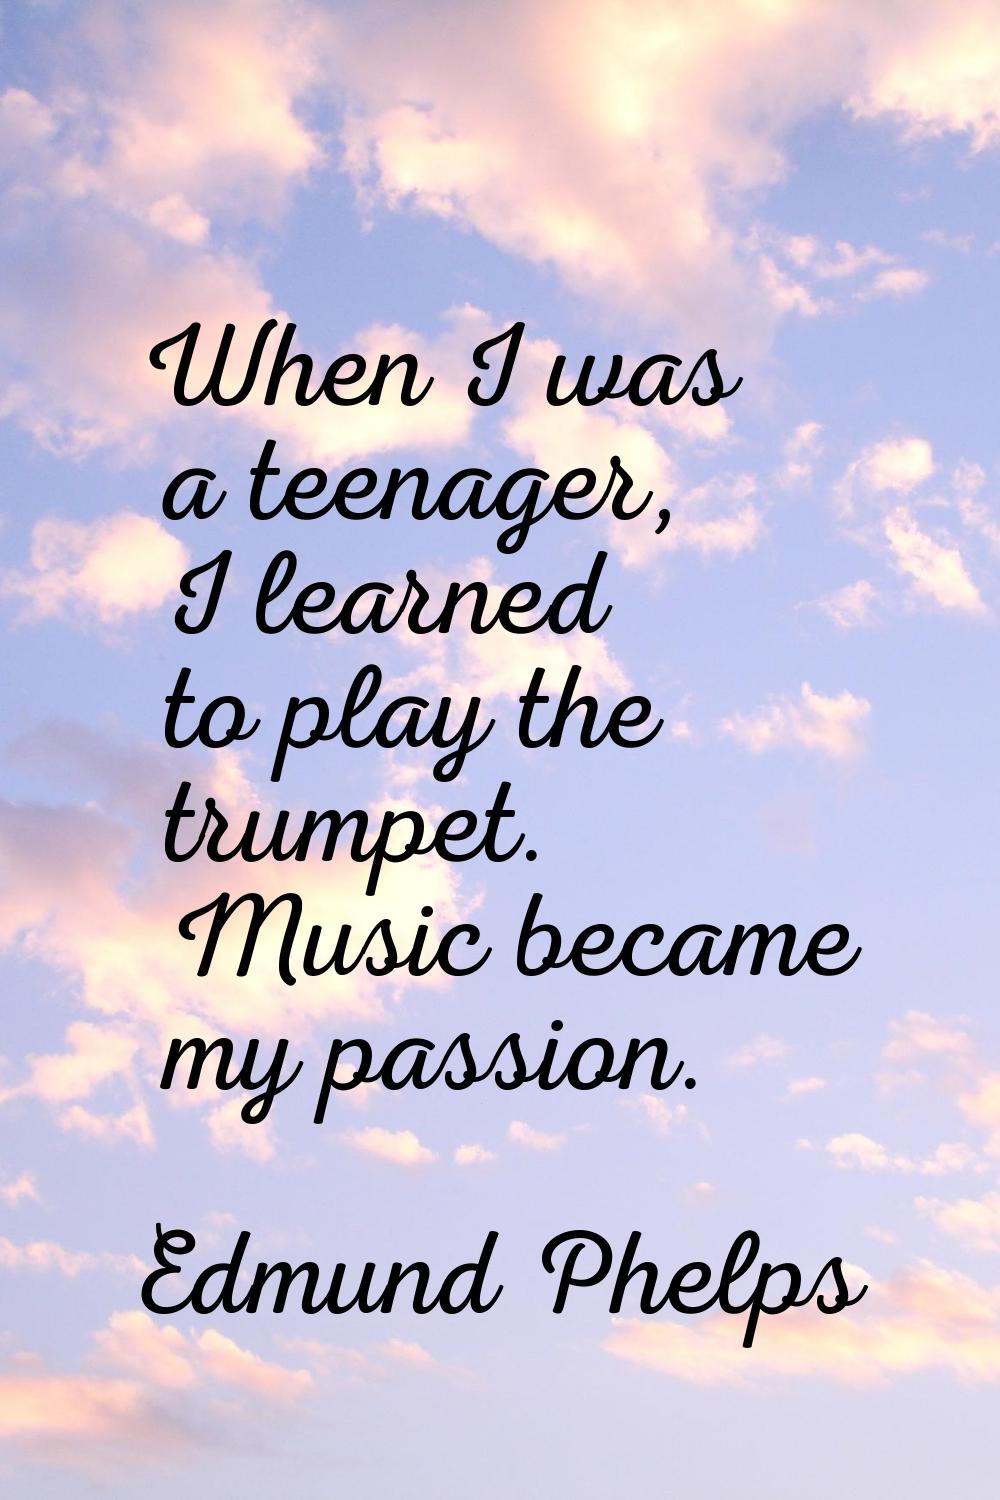 When I was a teenager, I learned to play the trumpet. Music became my passion.